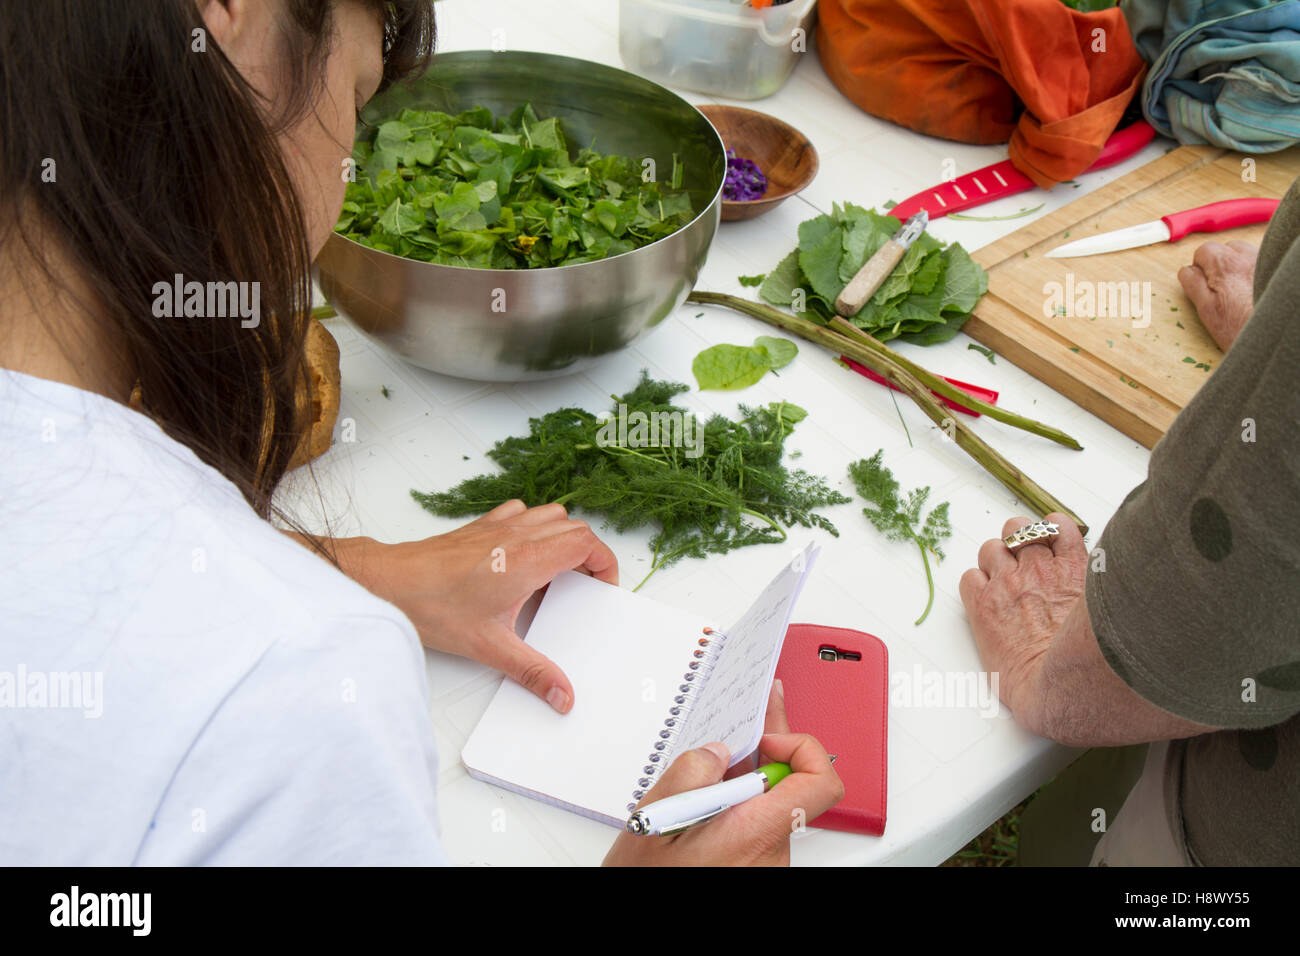 Taking notes during stage 'wild edible plants' France Stock Photo